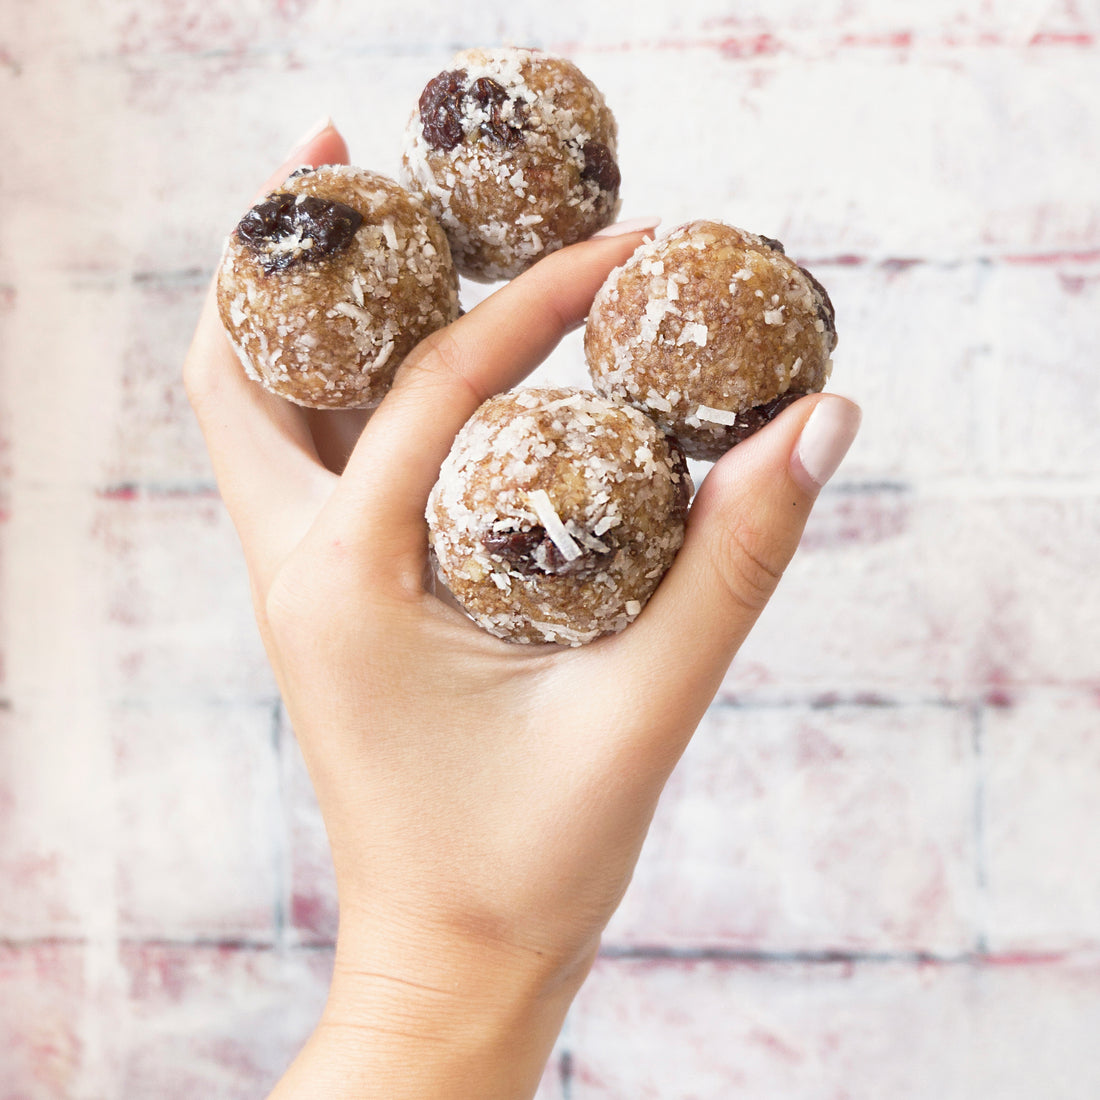 HOW TO MAKE HEALTHY COCONUT DATE BALLS